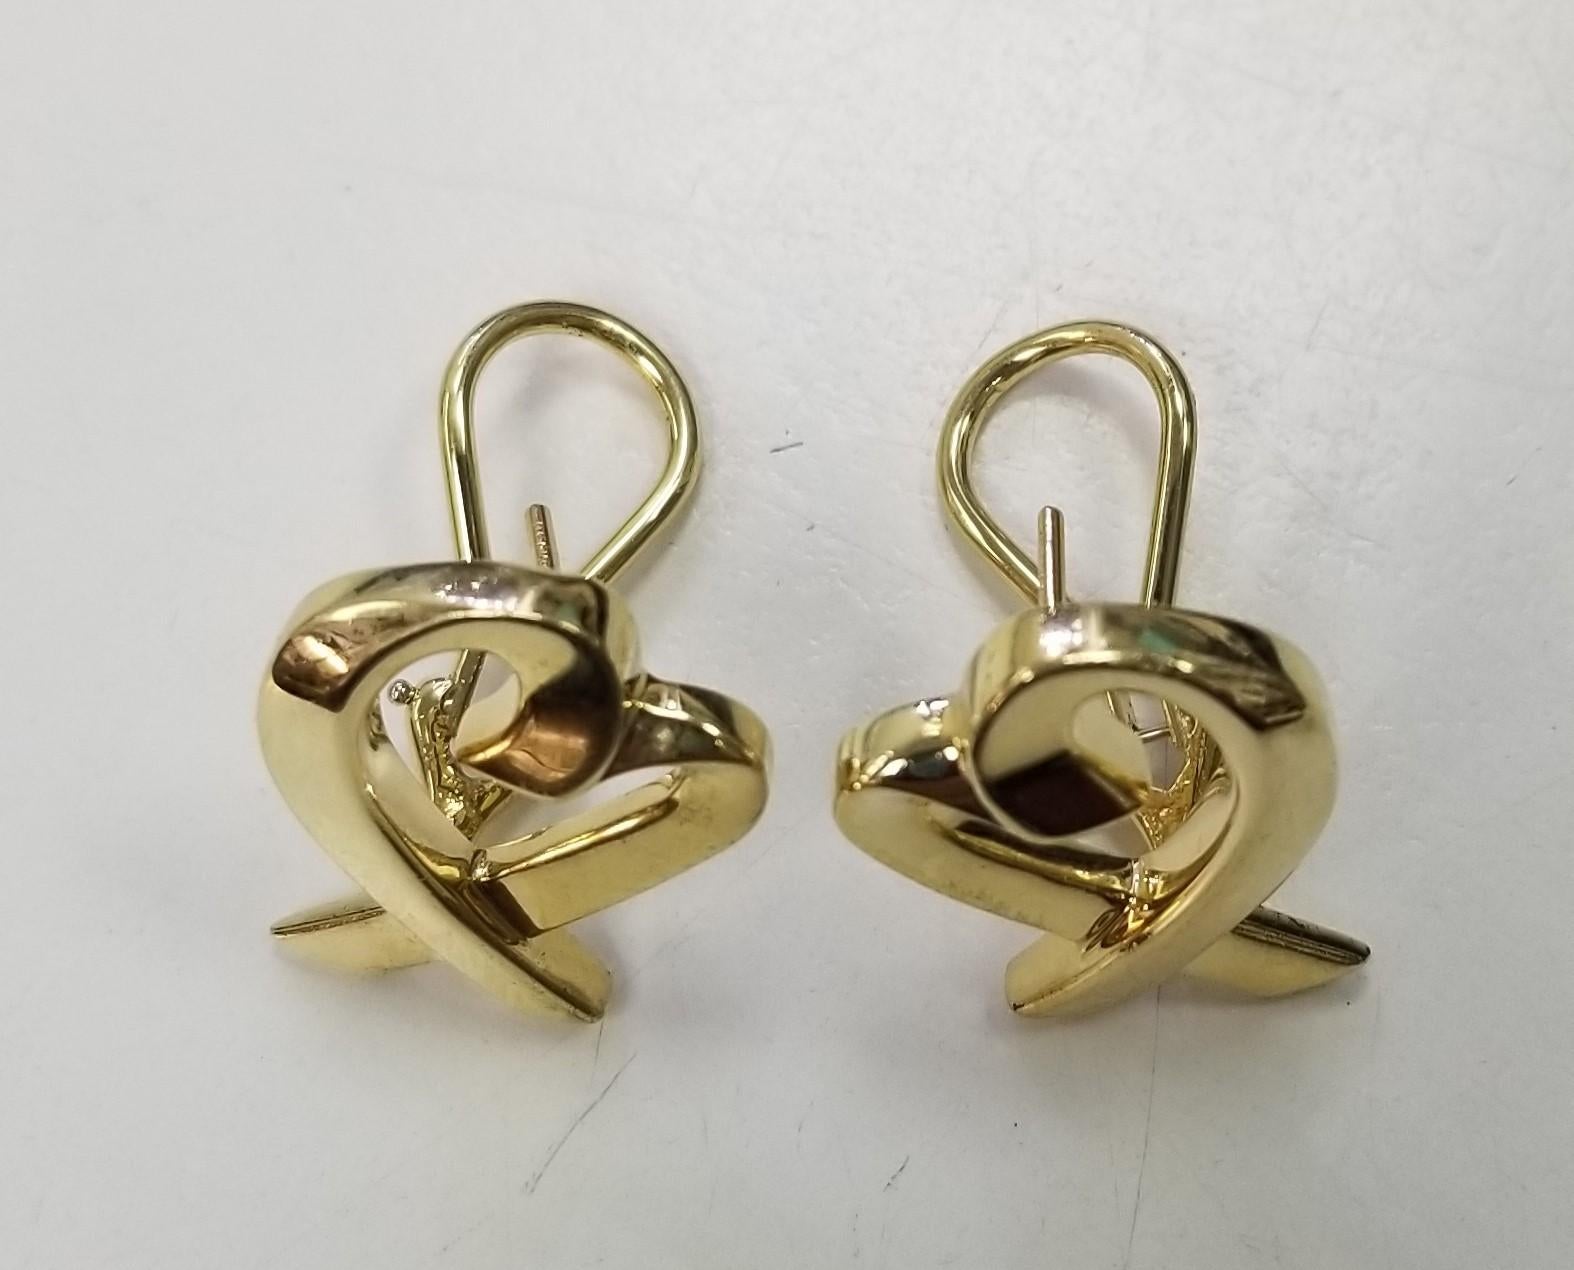 Specifications:
Pre-Owned (Great condition)
Brand: Tiffany & Co
Metal: 18K (Au 79.80-75%) Gold
Item specifics
Condition Pre-owned: Brand Tiffany & Co.
Type Earrings
Shape Heart
Metal Purity 18k
Closure Lever Back
Signed Yes
Style Huggie
Base Metal